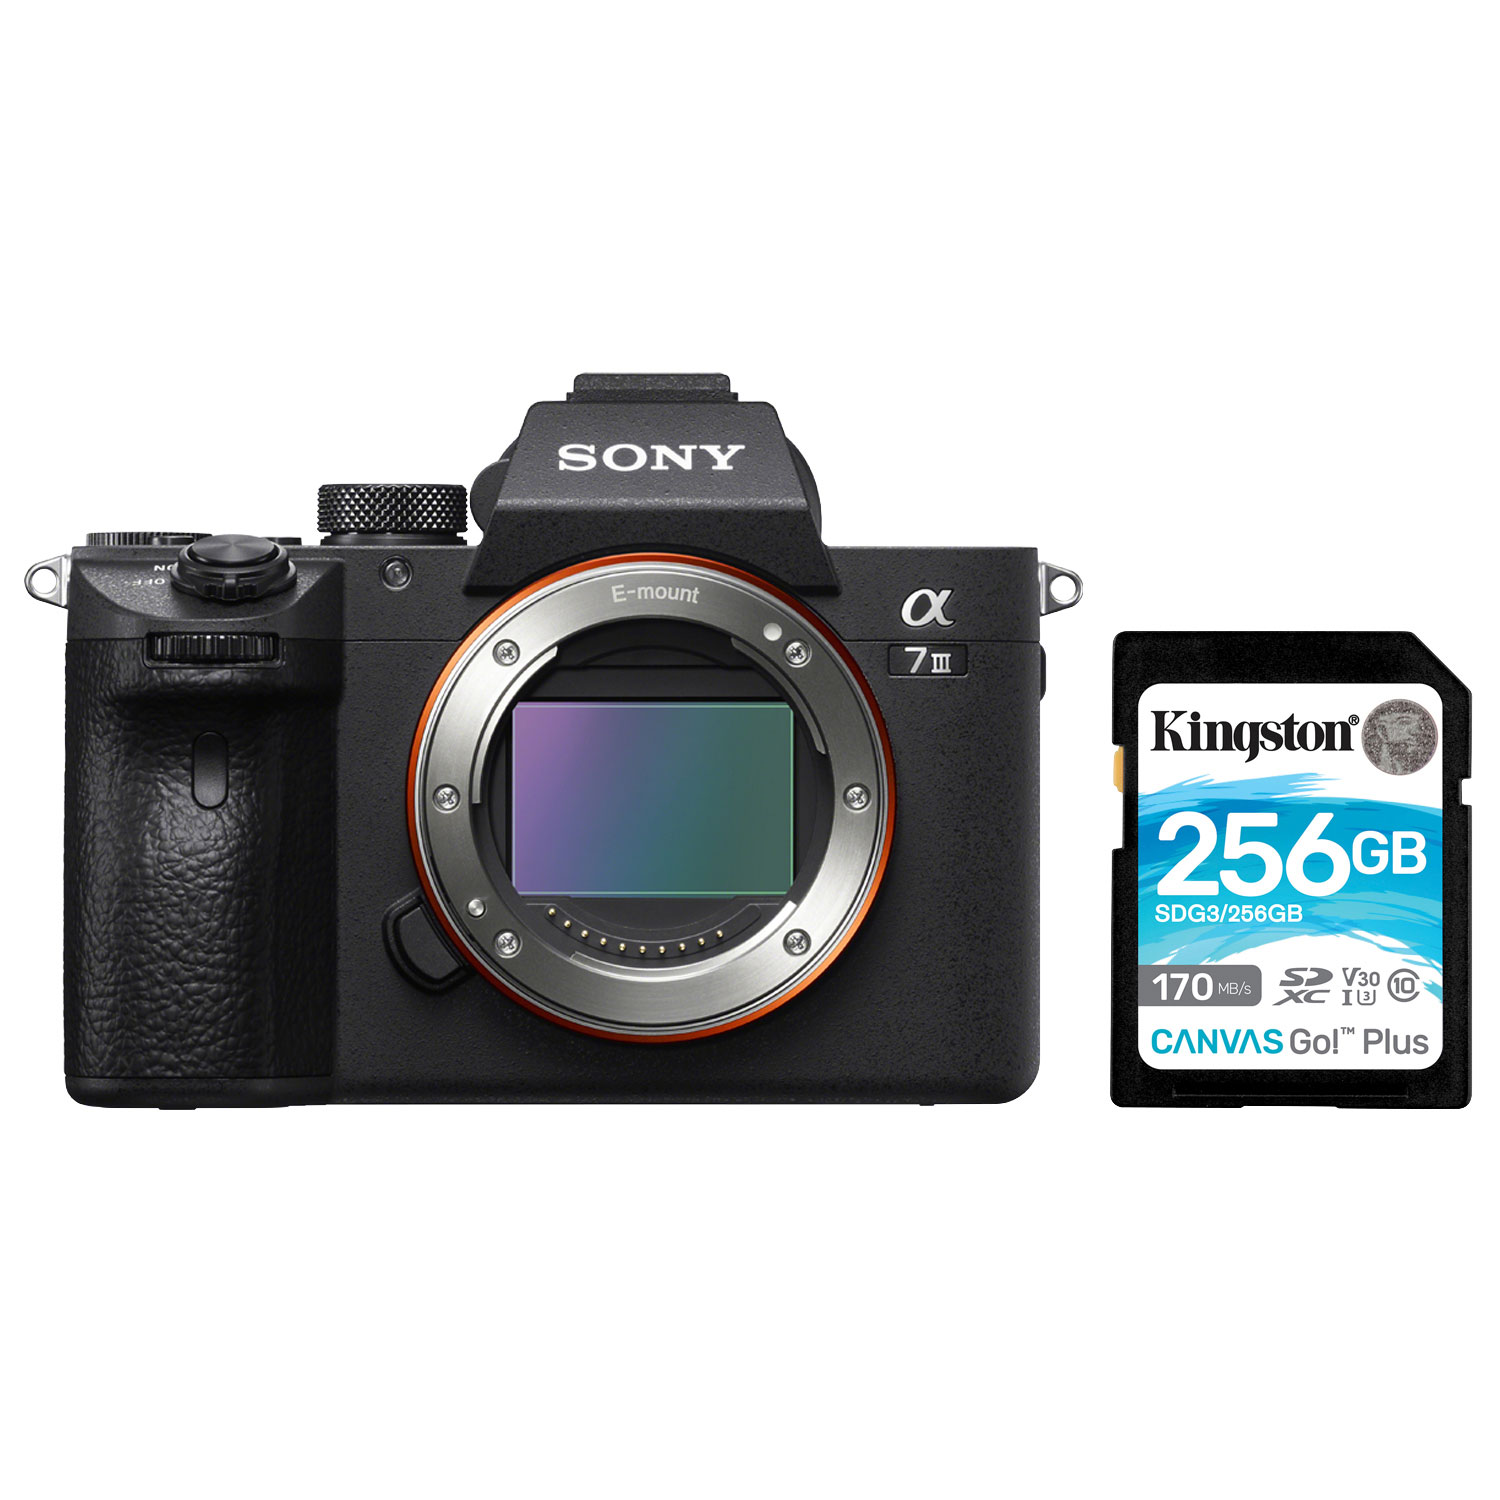 Sony Alpha a7 III Full-Frame Mirrorless Vlogger Camera (Body Only) with 256GB Memory Card